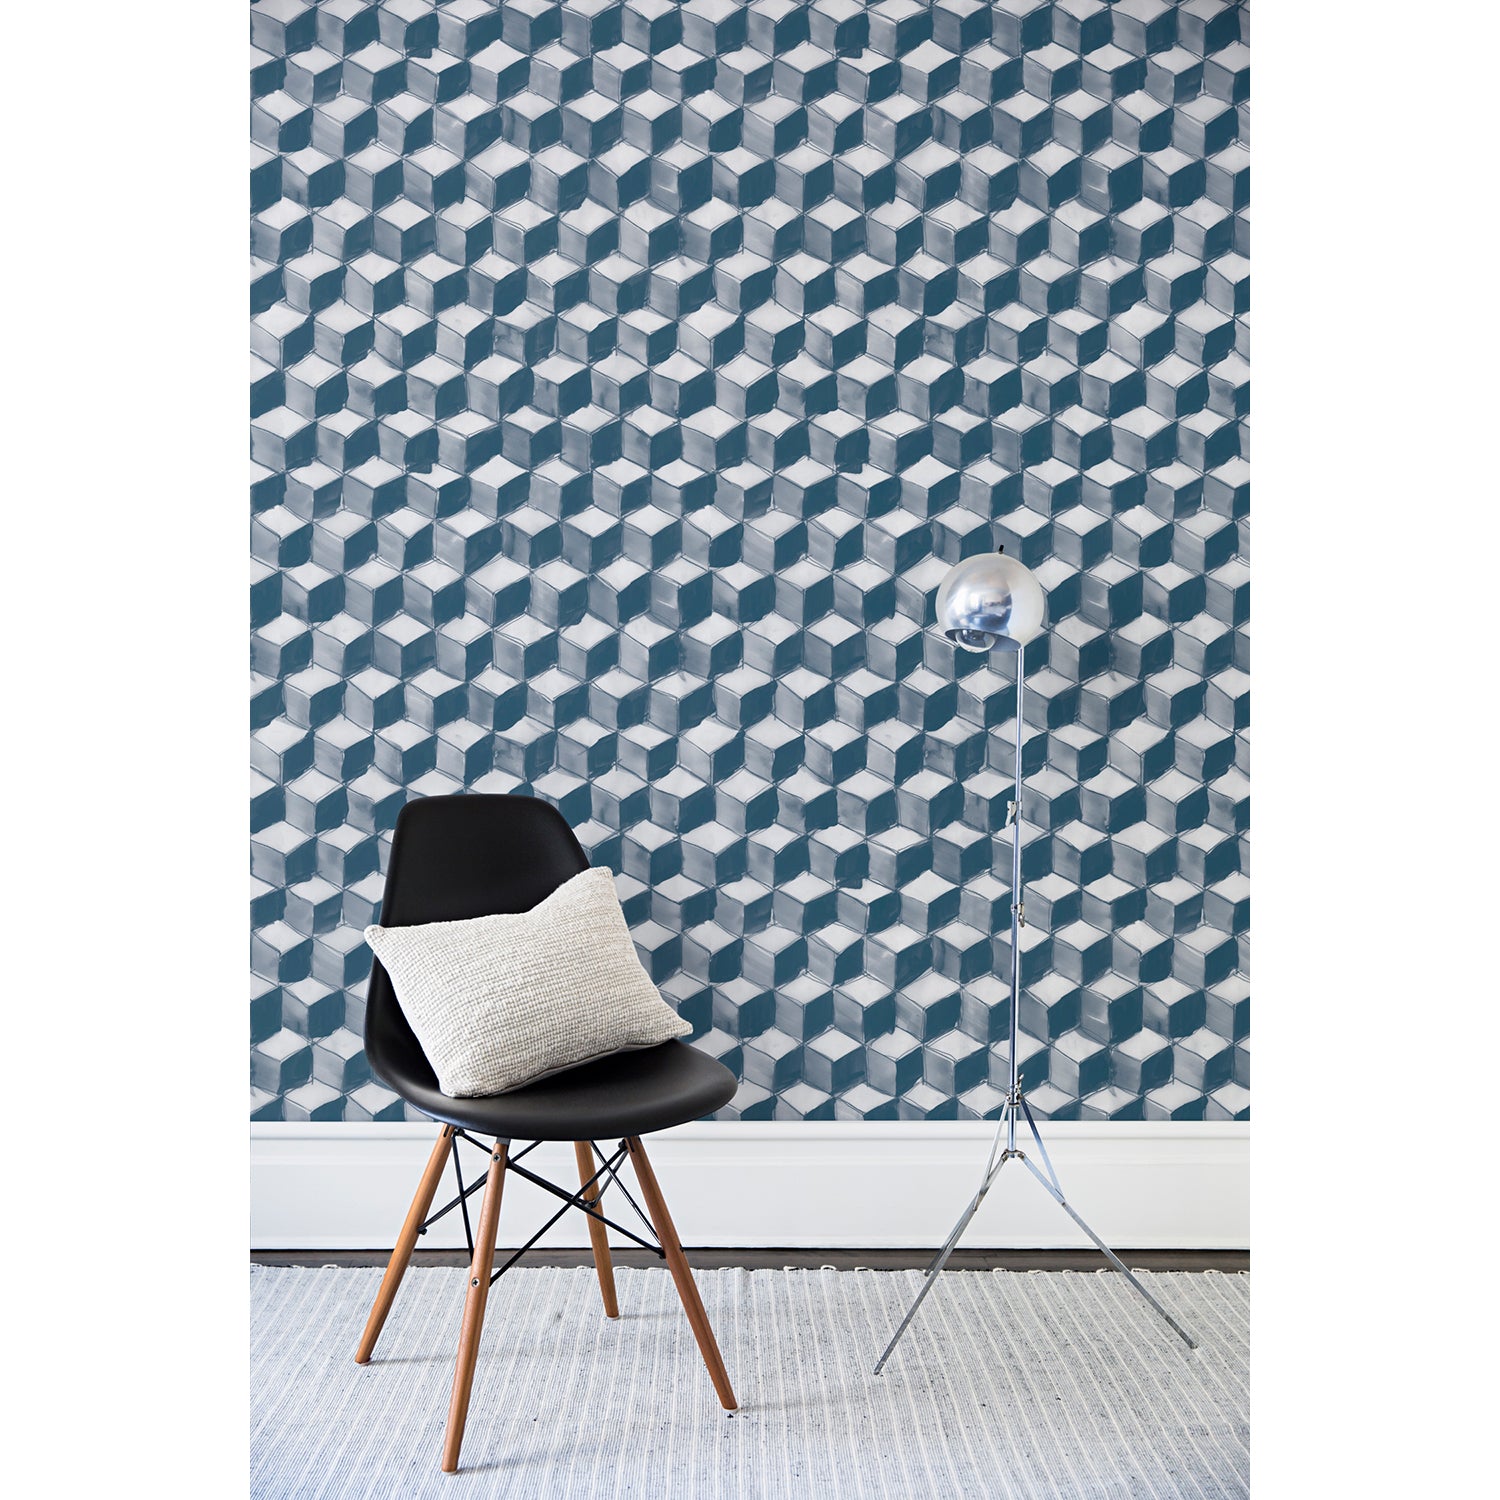 A chair and floor lamp in front of a wall papered in a hand-painted tumbling block pattern in shades of blue on a white background.